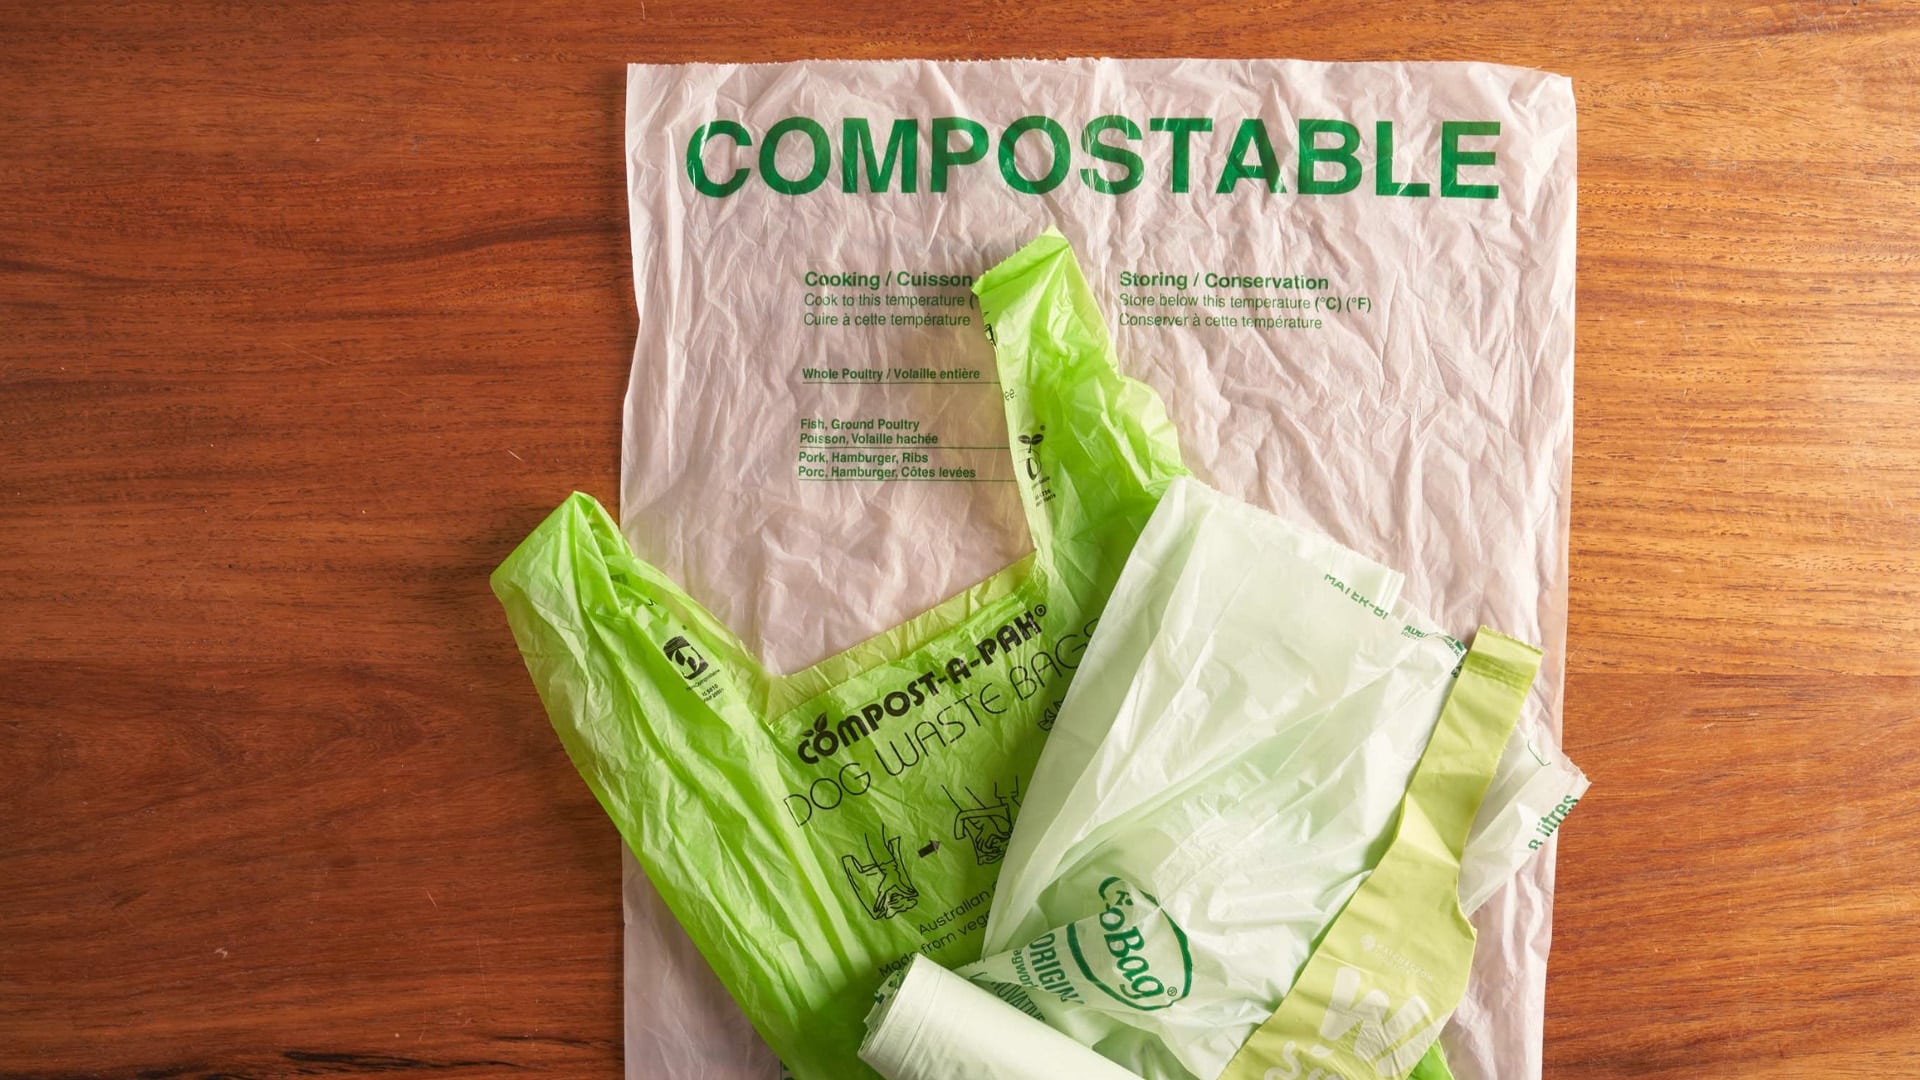 Govt approves startup loan to firm for commercialising 'compostable' plastic